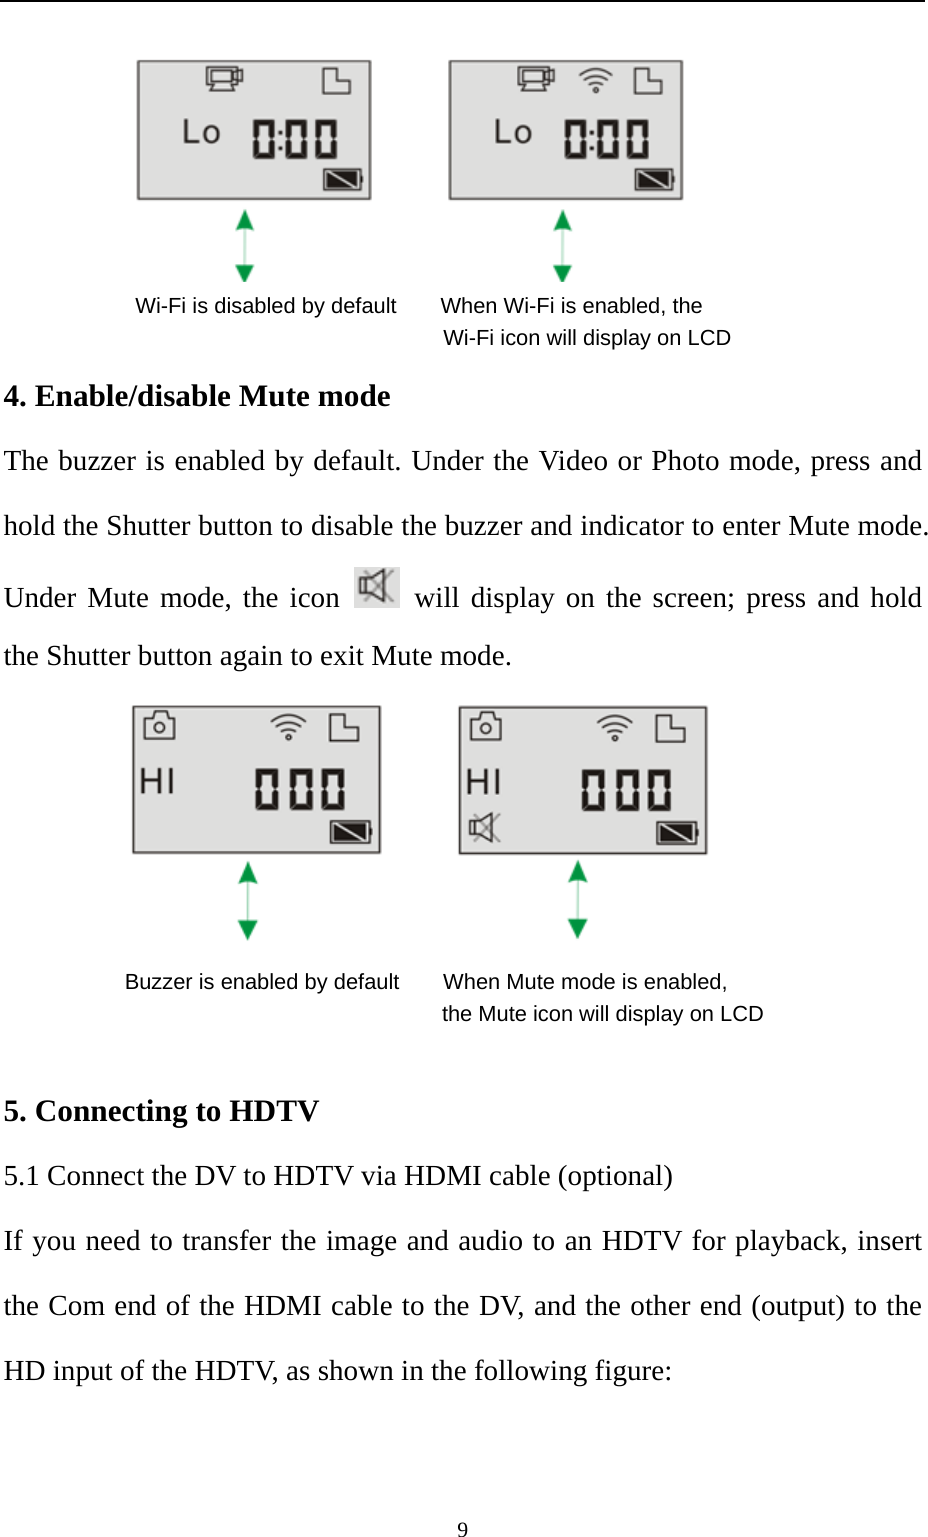   9         4. Enable/disable Mute mode                                        The buzzer is enabled by default. Under the Video or Photo mode, press and hold the Shutter button to disable the buzzer and indicator to enter Mute mode. Under Mute mode, the icon   will display on the screen; press and hold the Shutter button again to exit Mute mode.             5. Connecting to HDTV 5.1 Connect the DV to HDTV via HDMI cable (optional) If you need to transfer the image and audio to an HDTV for playback, insert the Com end of the HDMI cable to the DV, and the other end (output) to the HD input of the HDTV, as shown in the following figure:  Wi-Fi is disabled by default        When Wi-Fi is enabled, the                                Wi-Fi icon will display on LCD       Buzzer is enabled by default        When Mute mode is enabled,                                   the Mute icon will display on LCD 